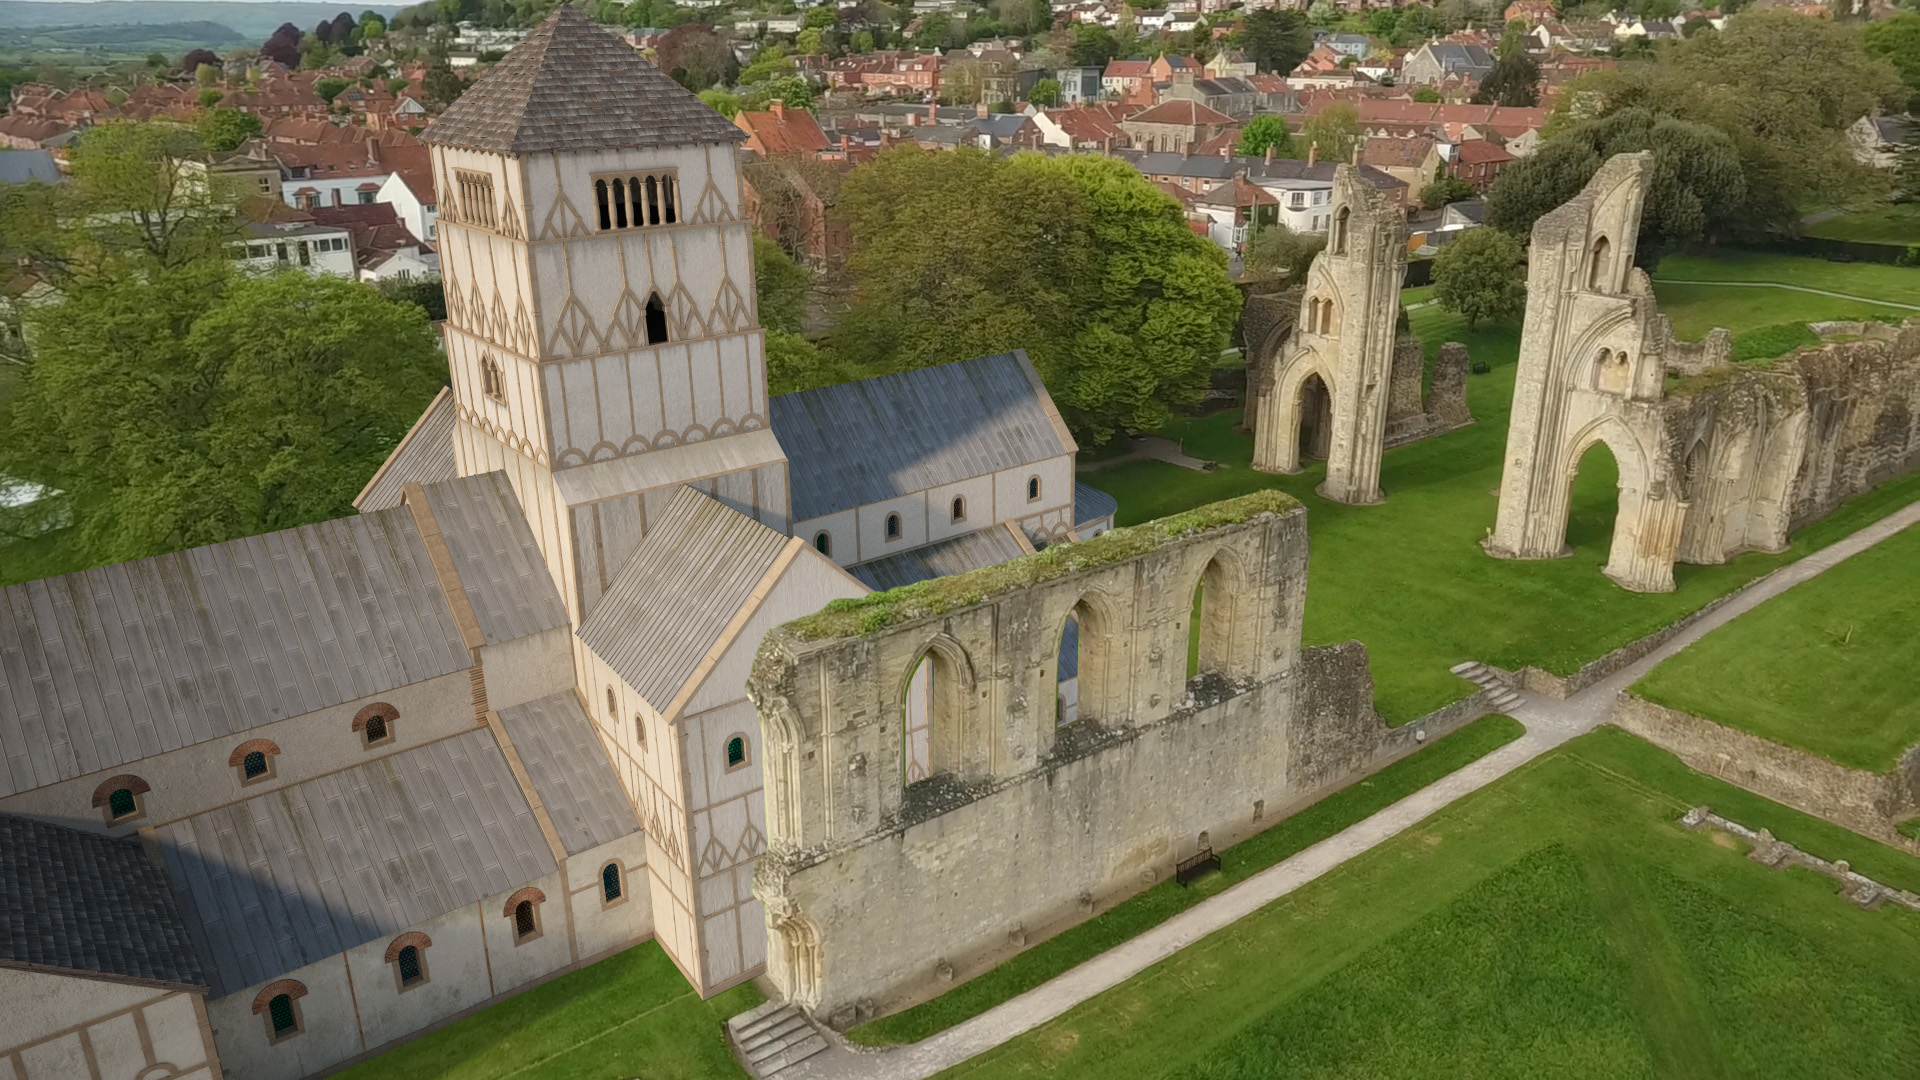 A virtual reconstruction of Glastonbury Abbey in the Anglo Saxon period based on research at the University of Reading